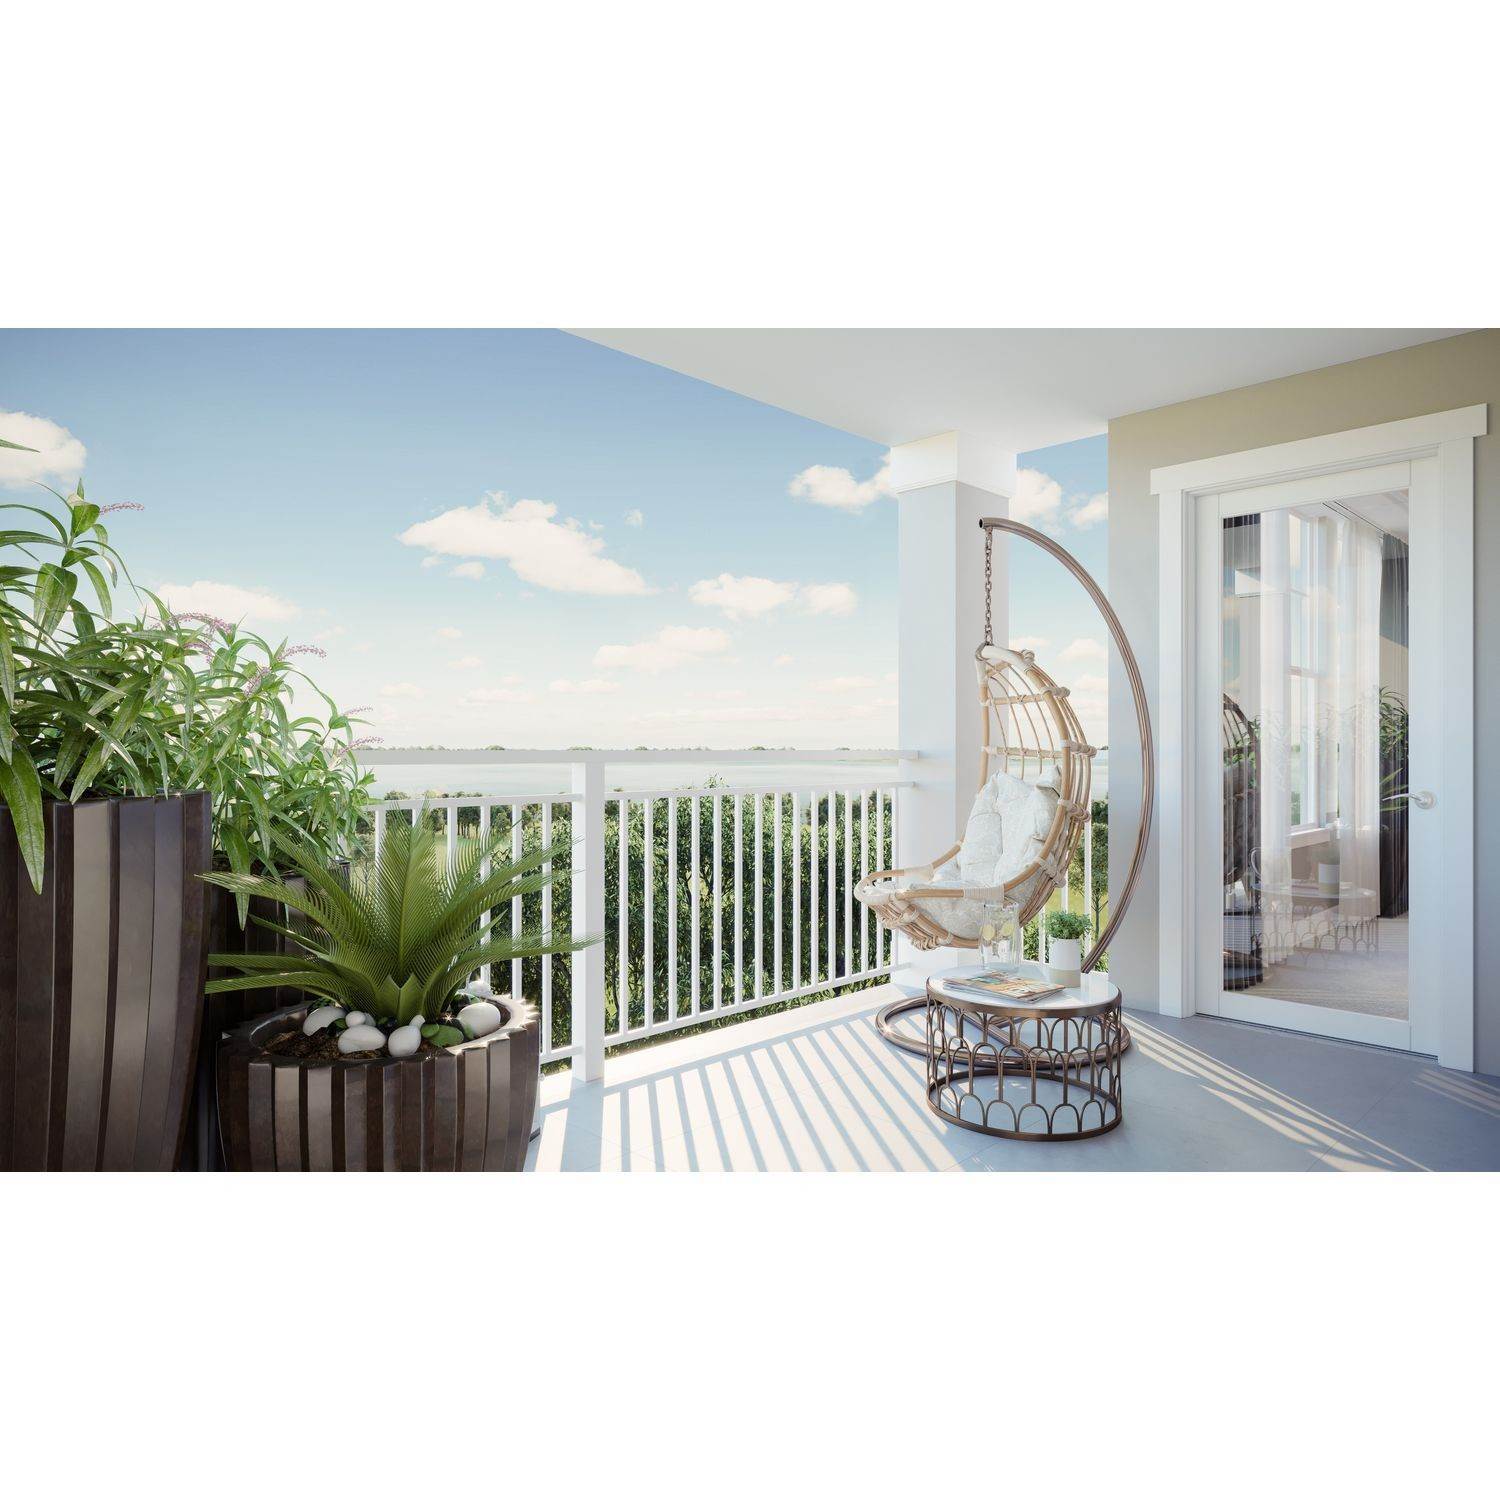 1. Condominium for Sale at K. Hovnanian’s® Four Seasons At Kent Island - Luxu 203 Bayberry Drive, Chester, MD 21619